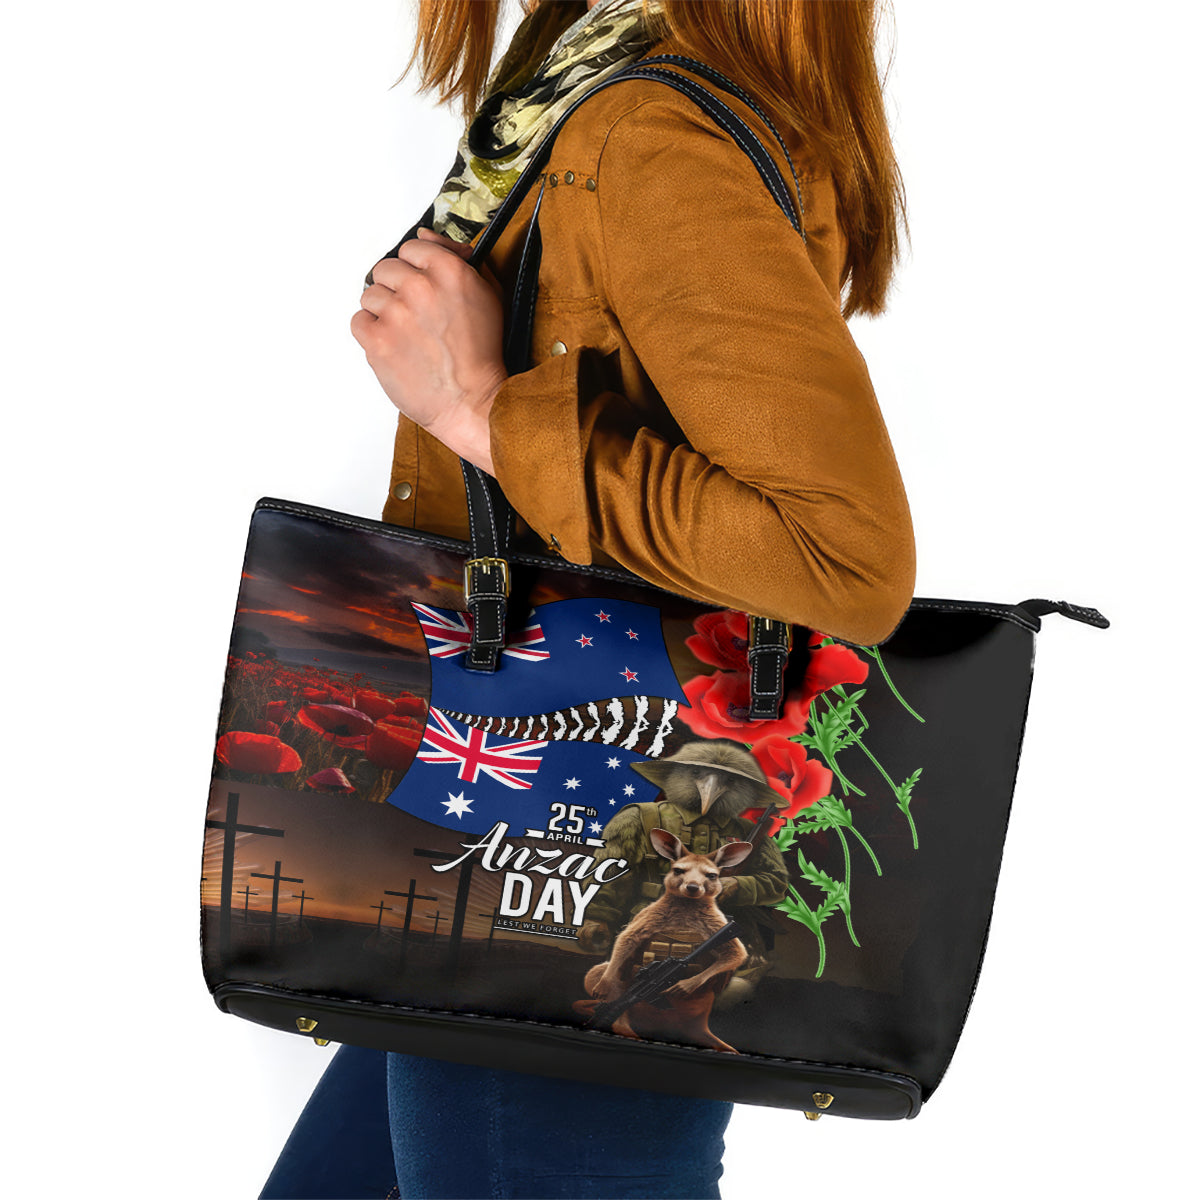 New Zealand and Australia ANZAC Day Leather Tote Bag National Flag mix Kiwi Bird and Kangaroo Soldier Style